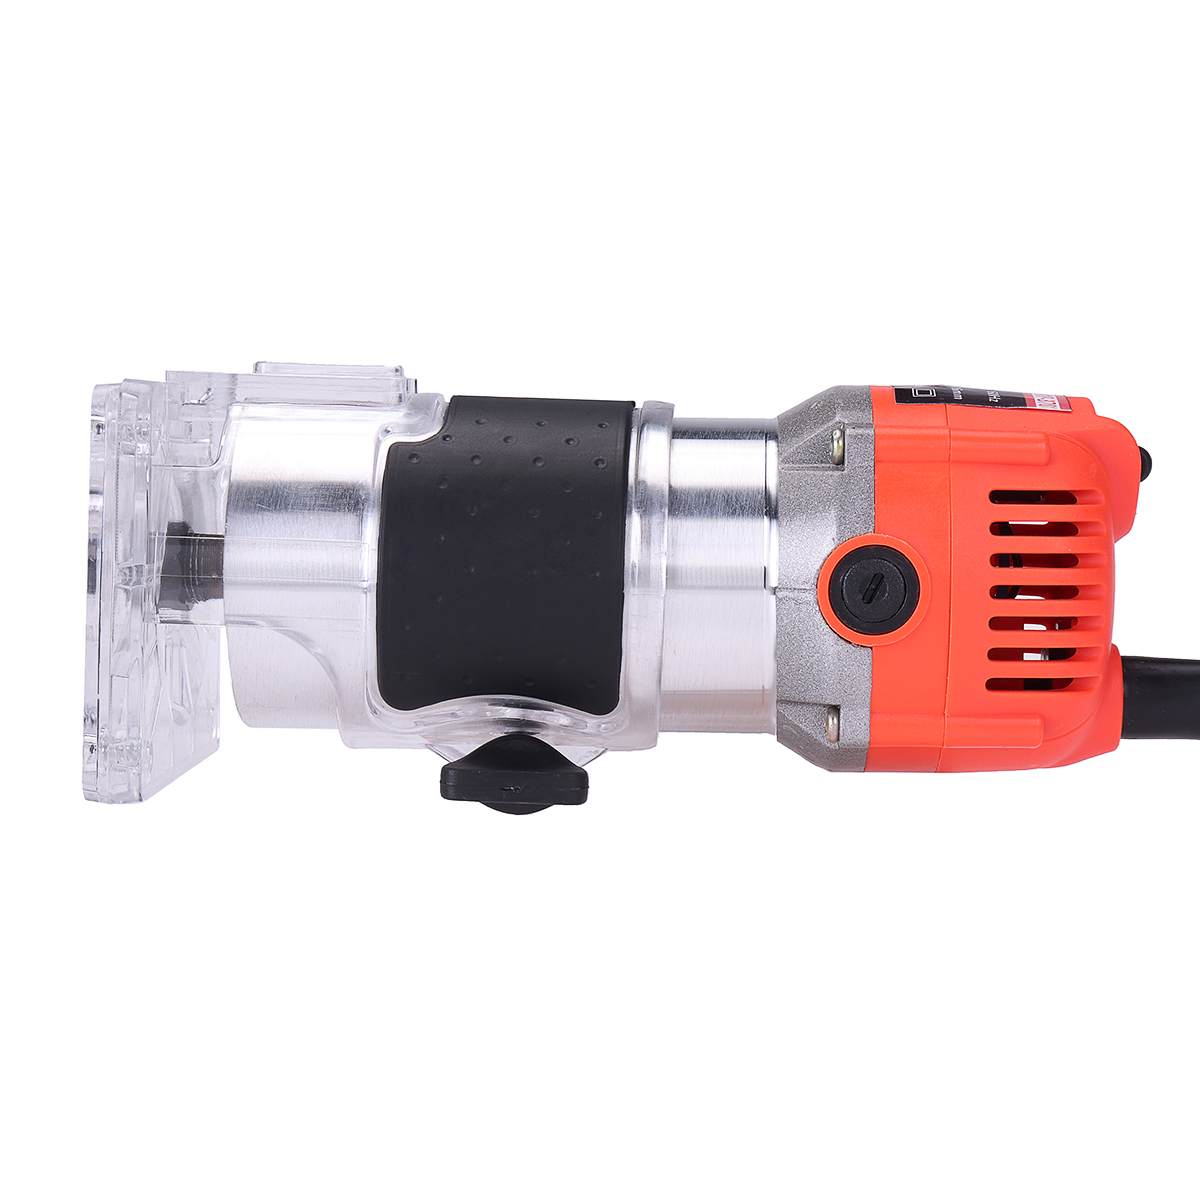 Electric Trimmer Laminator Wood Router 110V 750W 35000PRM 1/4'' Tool Machine Electric Hand Trimmer Wood Laminator Router Joiners